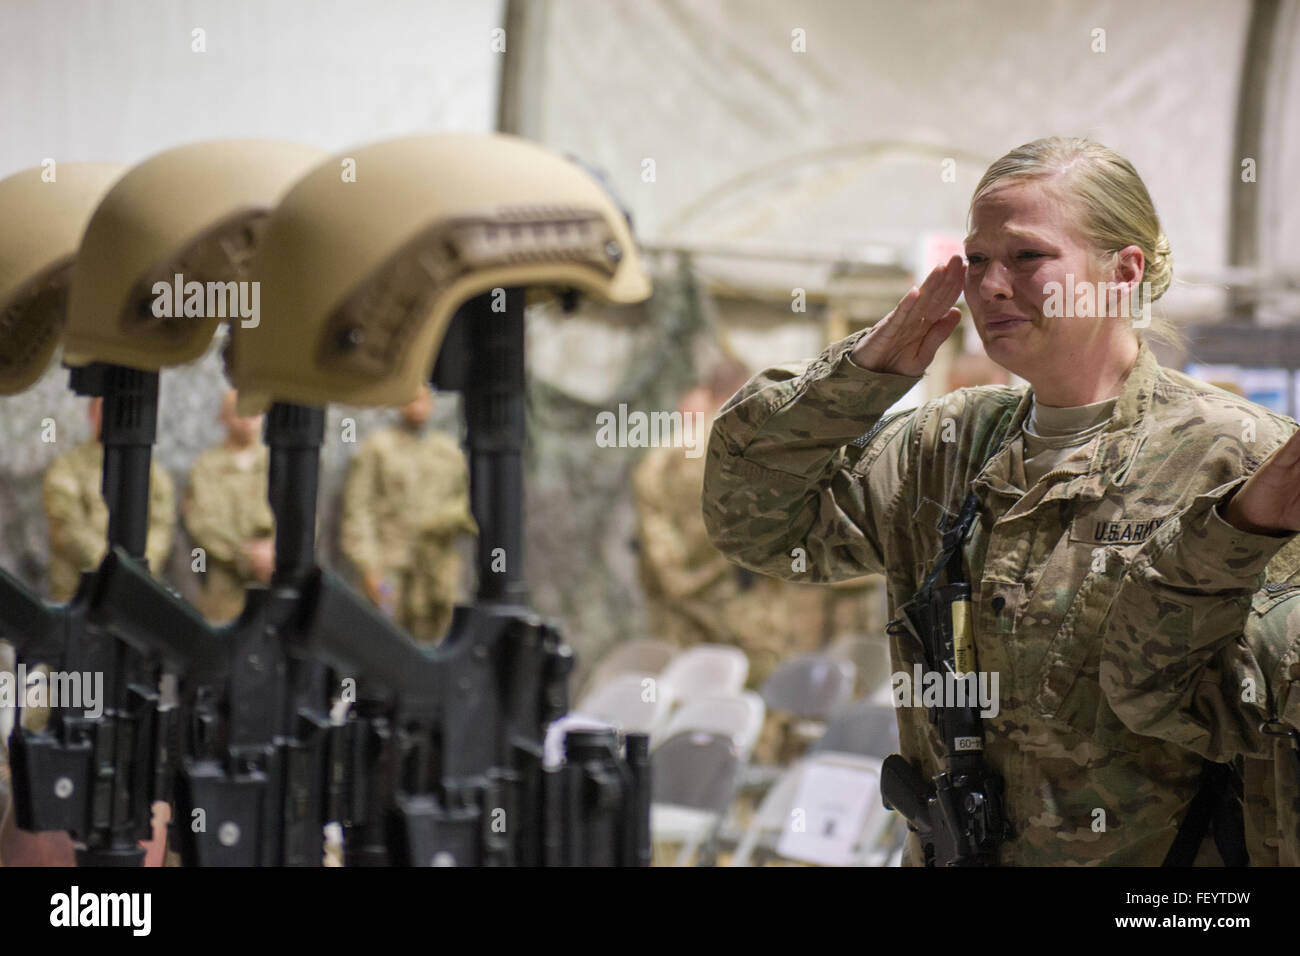 Service members from several units at Bagram Air Field, Afghanistan, pay their respects during a fallen comrade ceremony held in honor of six Airmen Dec. 23, 2015. The six Airmen lost their lives in an improvised explosive attack near Bagram Dec. 21, 2015. Stock Photo